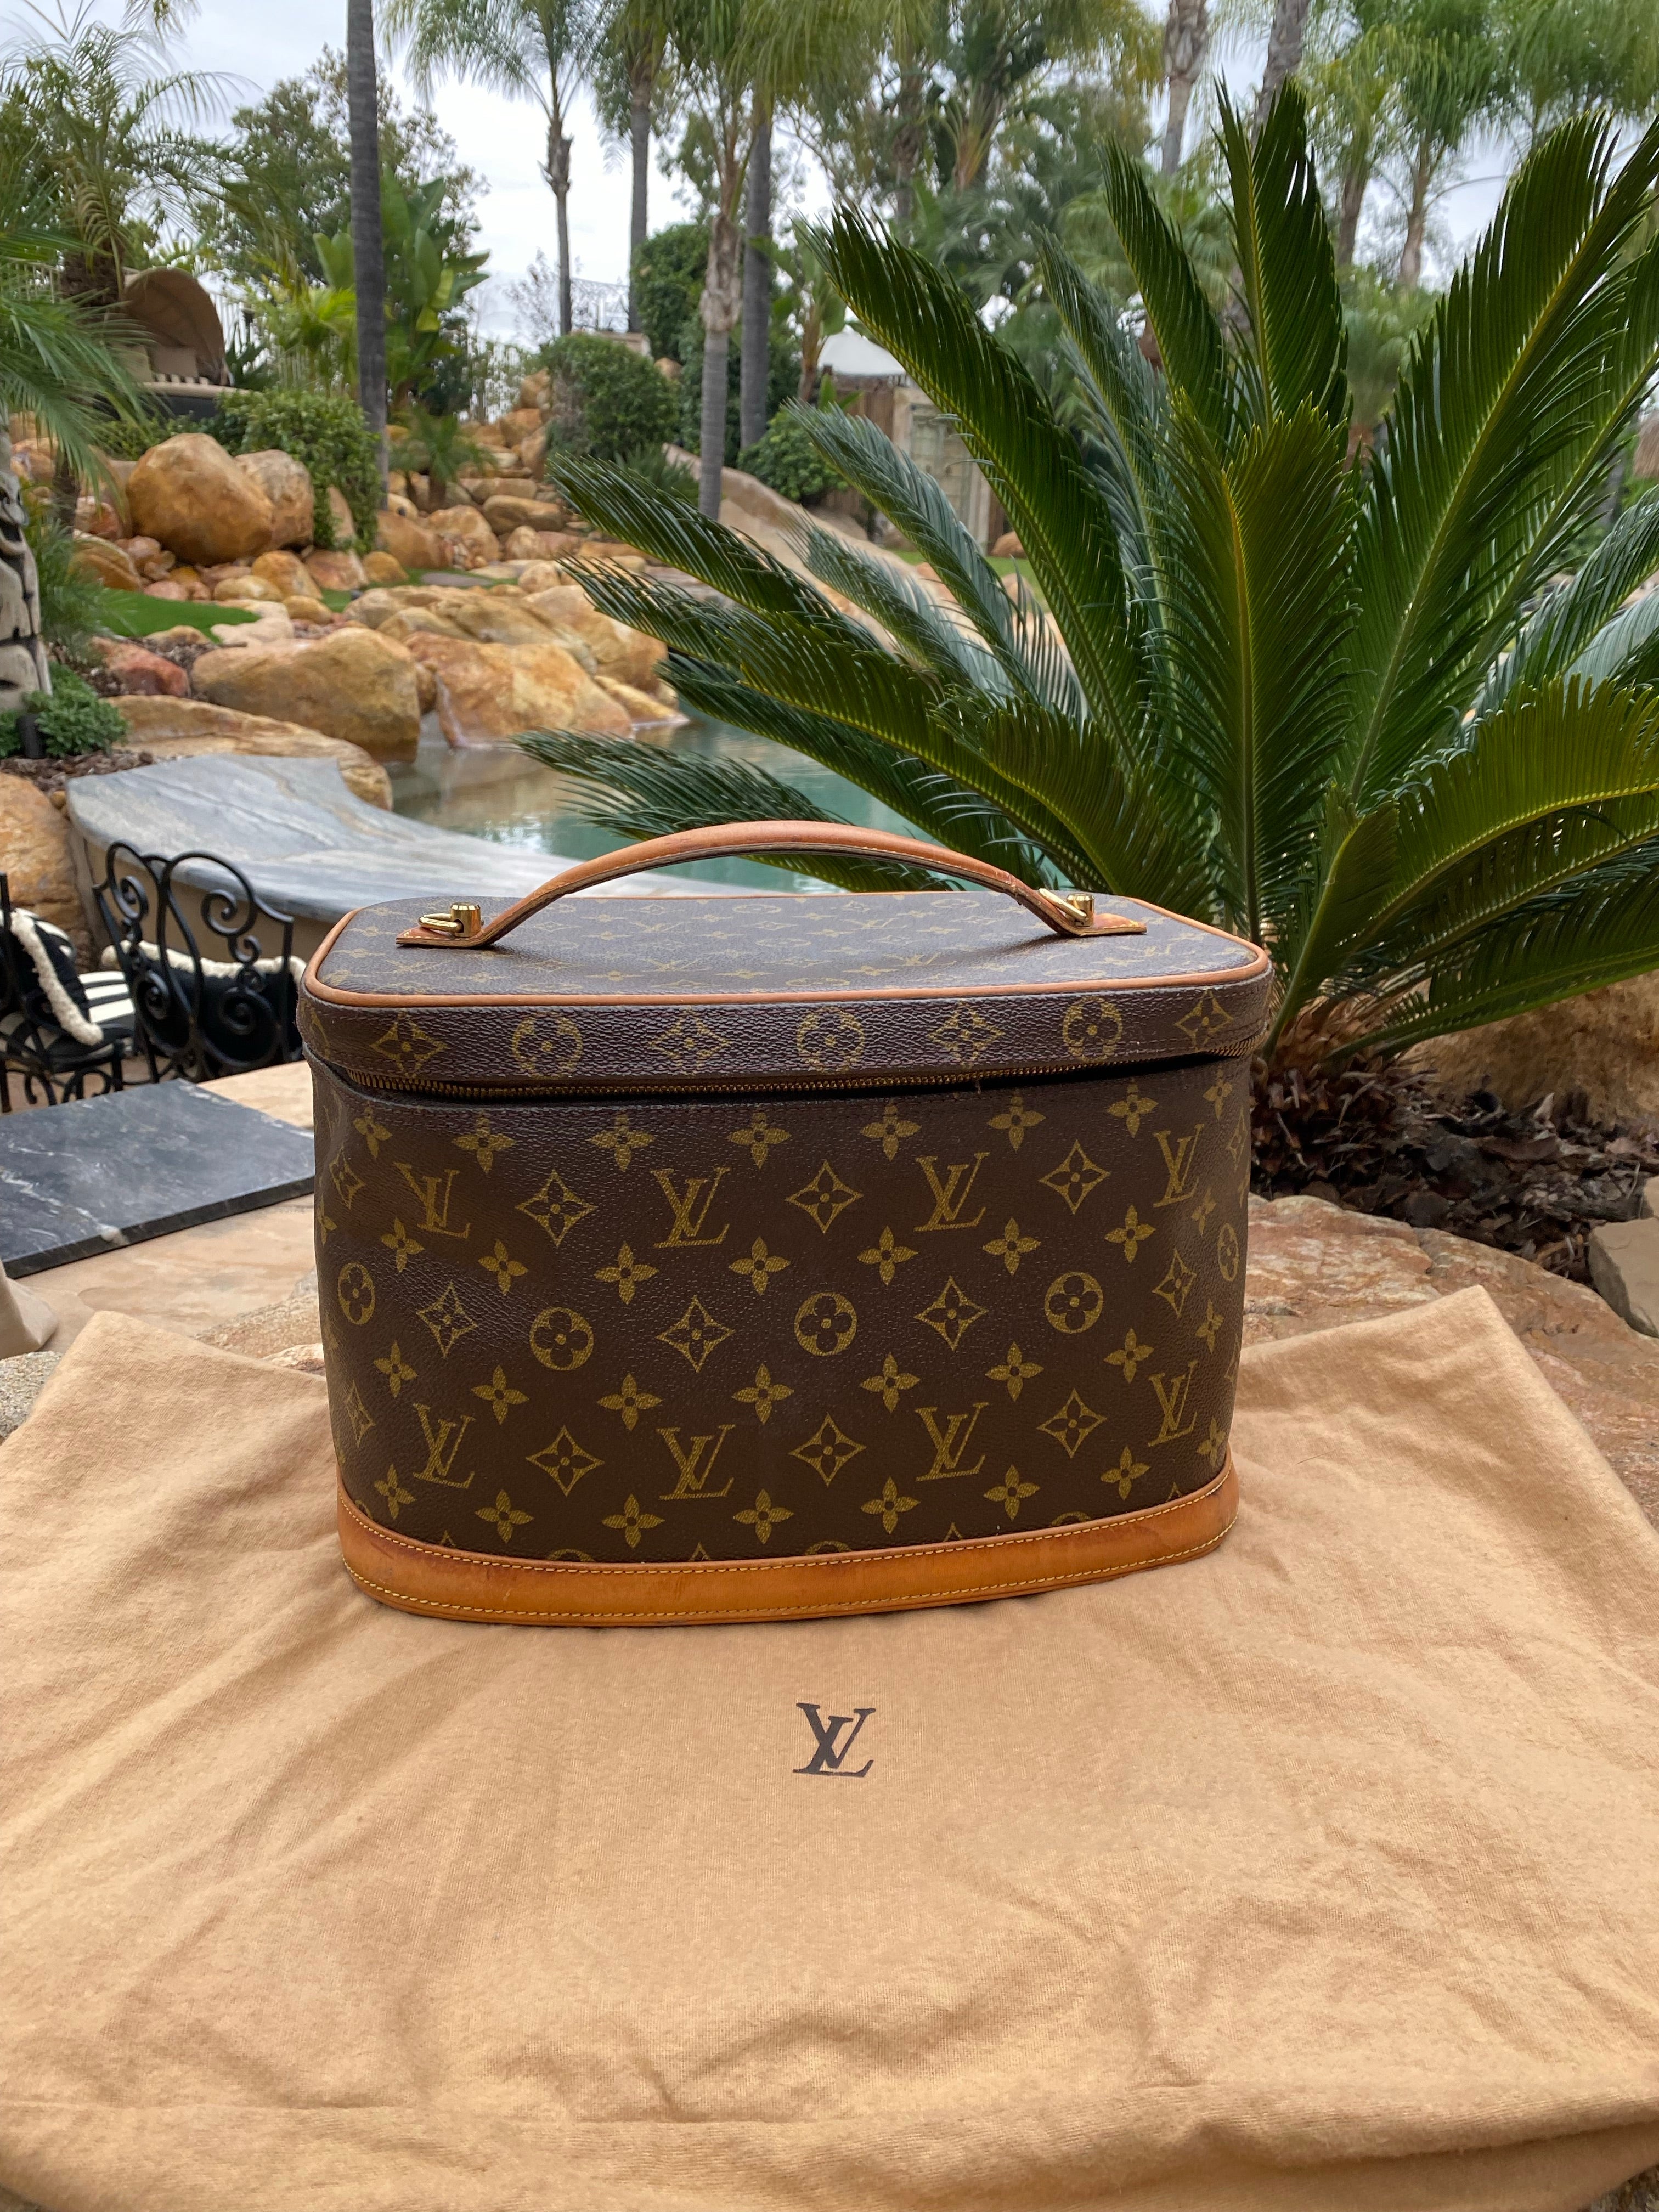 New Louis Vuitton Ombre Beauty Travel Case Bag at 1stDibs